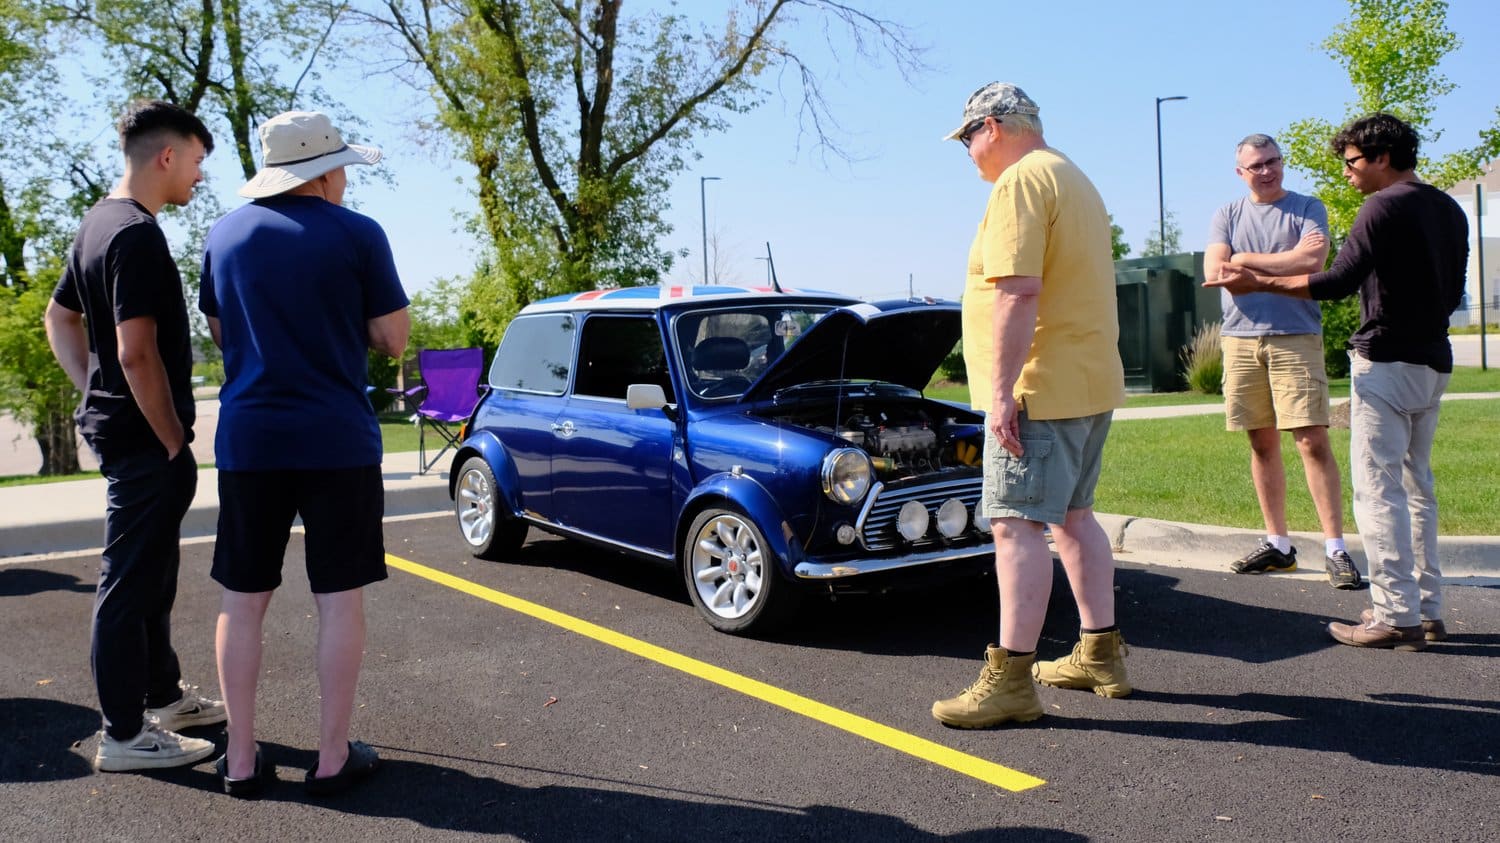 Car enthusiasts checking out the Mini Cooper.